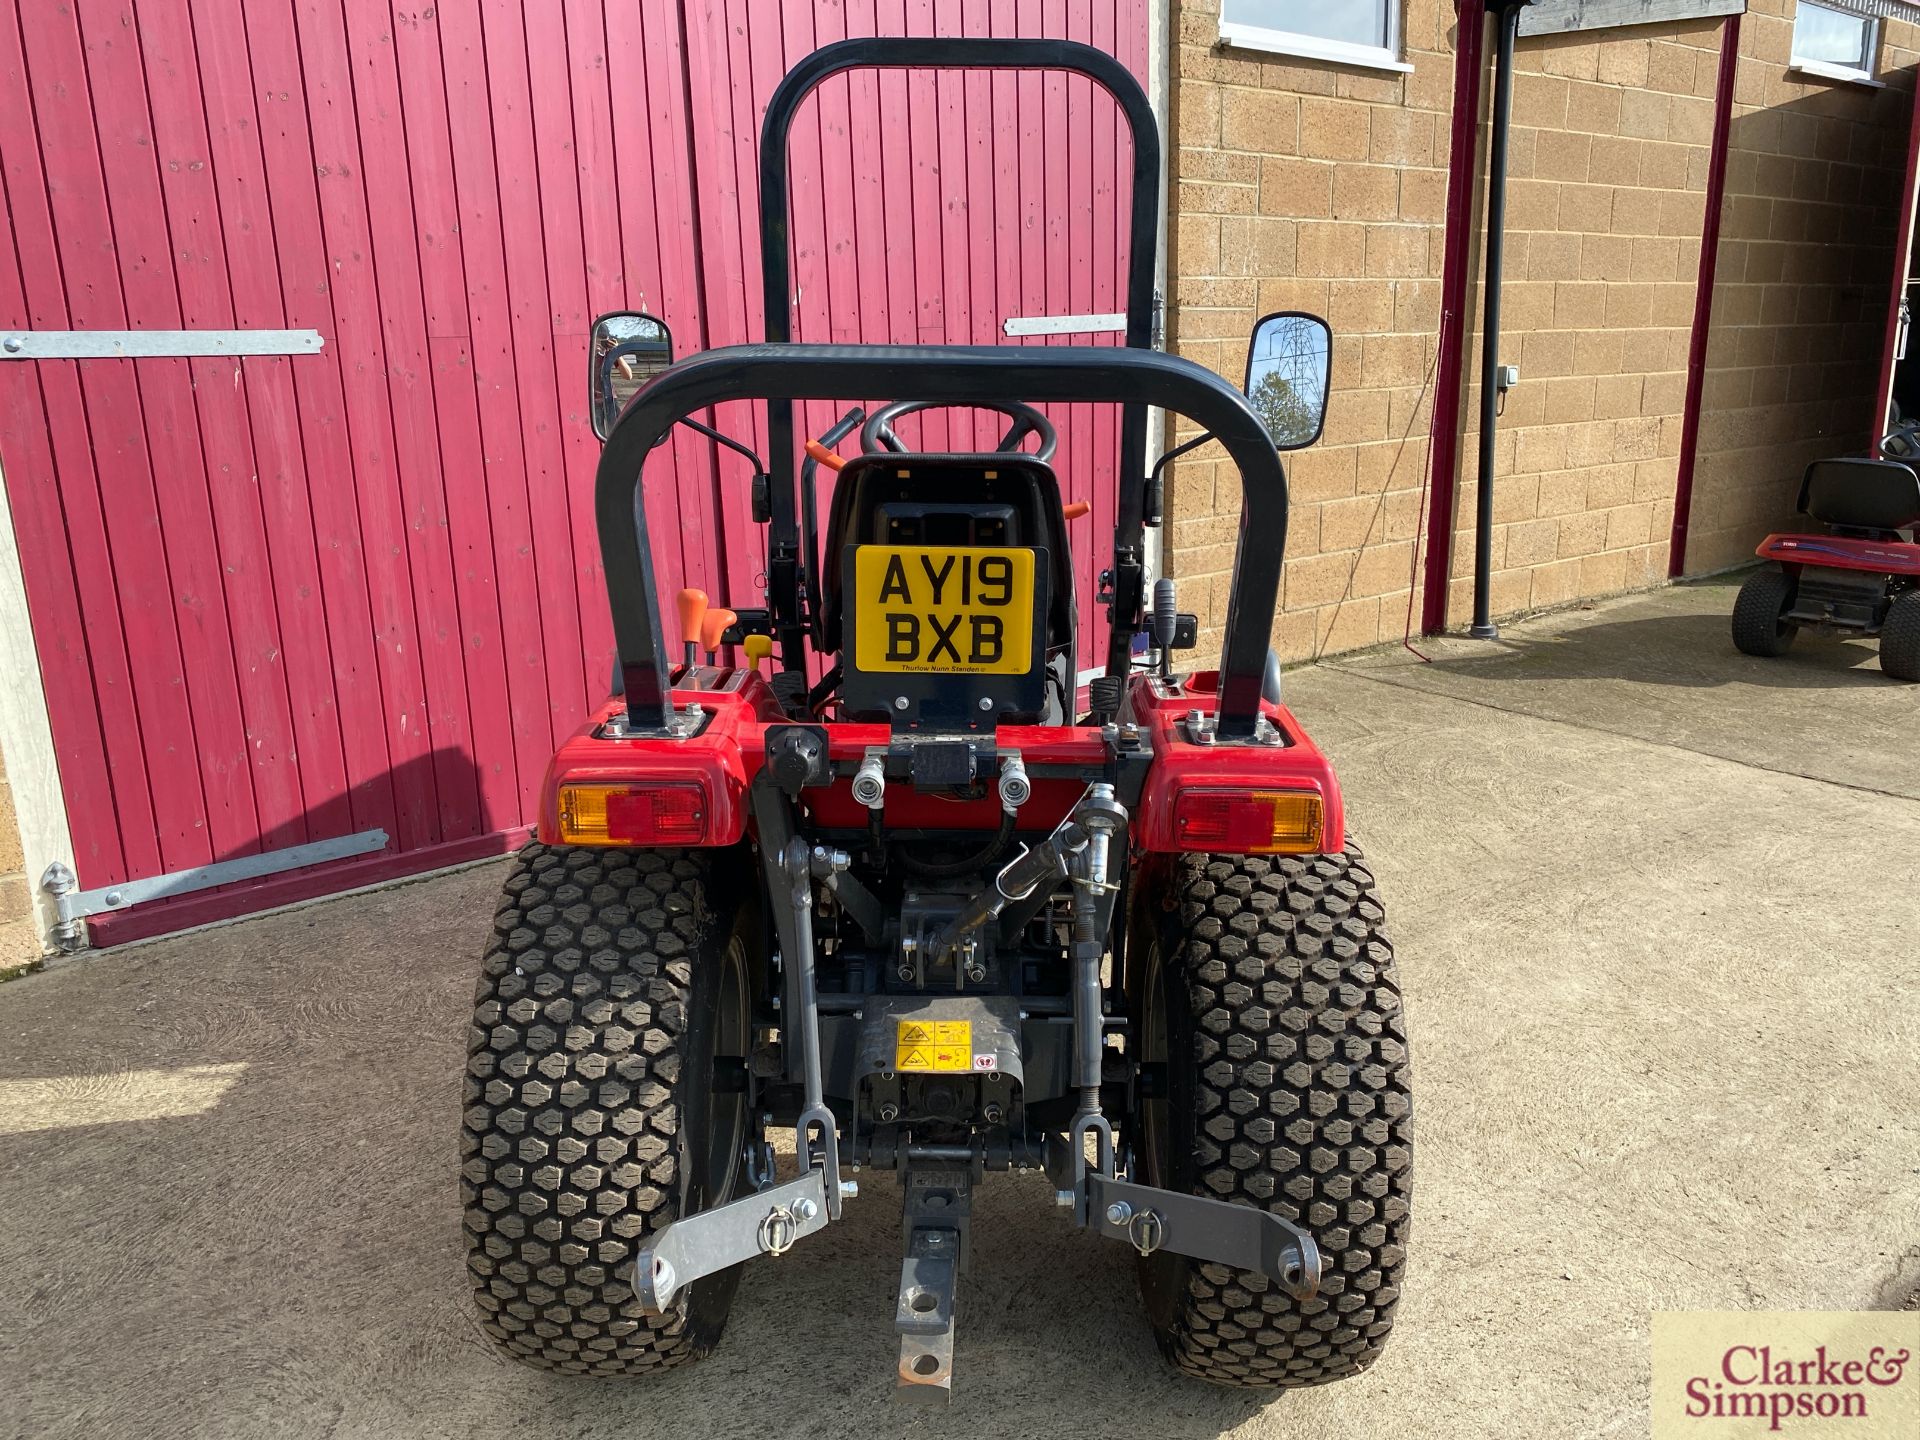 Massey Ferguson 1520 4WD compact tractor. 2017. Registration AY19 BXB. Date of first registration - Image 4 of 38